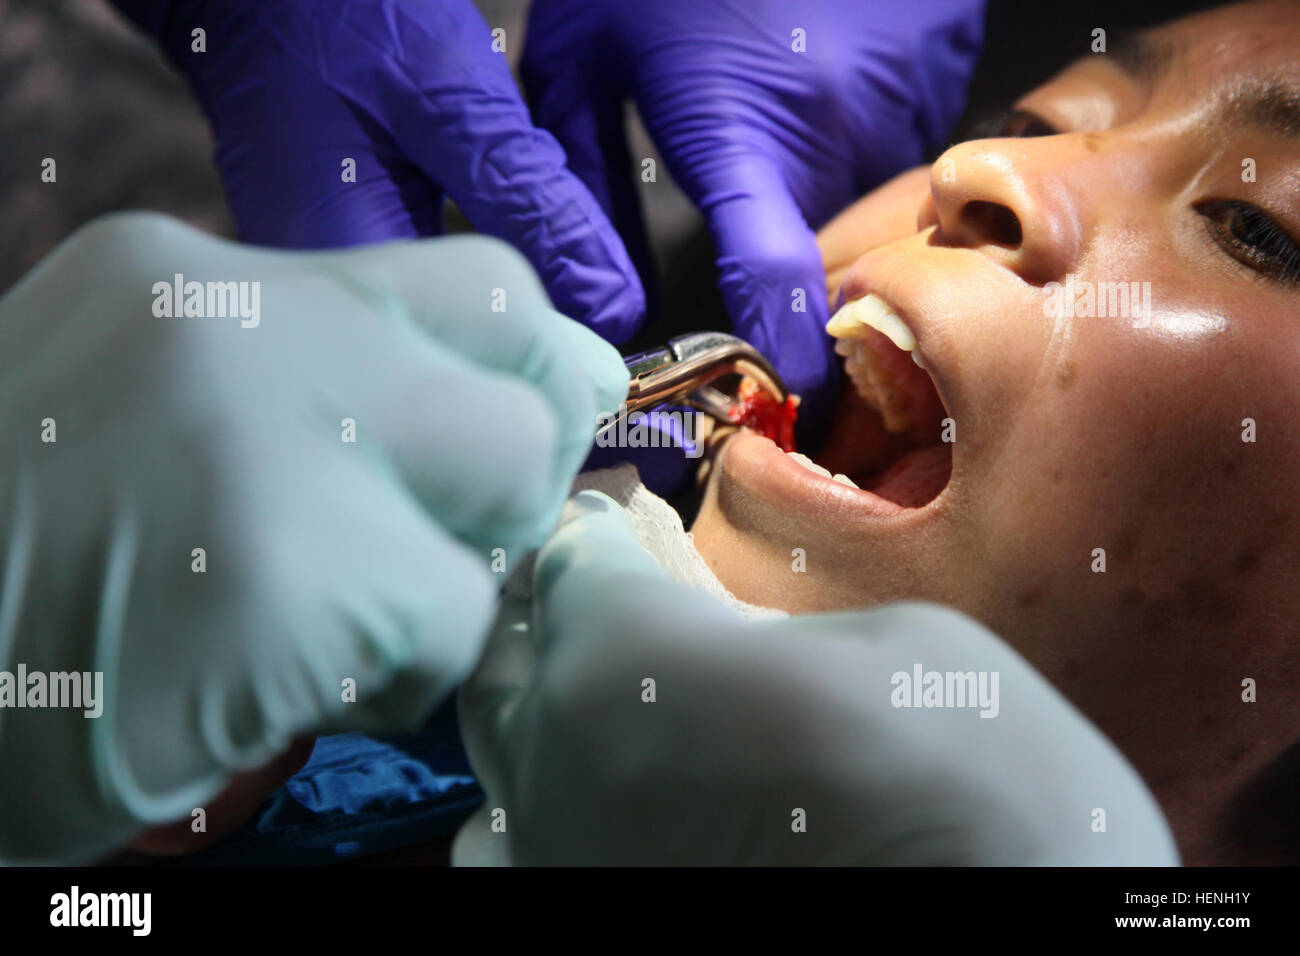 U.S. Army Soldiers of the Arizona Medical Detachment, perform a dental procedure on a Guatemalan woman at a Medical Readiness Training Exercise during Beyond the Horizon, Lomas Abajo, Guatemala, May 22, 2014. Beyond the Horizon is an annual exercise that embraces the partnership between the United States and Guatemala, to provide focused humanitarian assistance through various medical, dental, and civic action programs. (U.S. Army photo by Pfc. Christopher Martin/Released) Beyond The Horizon 2014, Guatemala 140522-A-GA303-065 Stock Photo